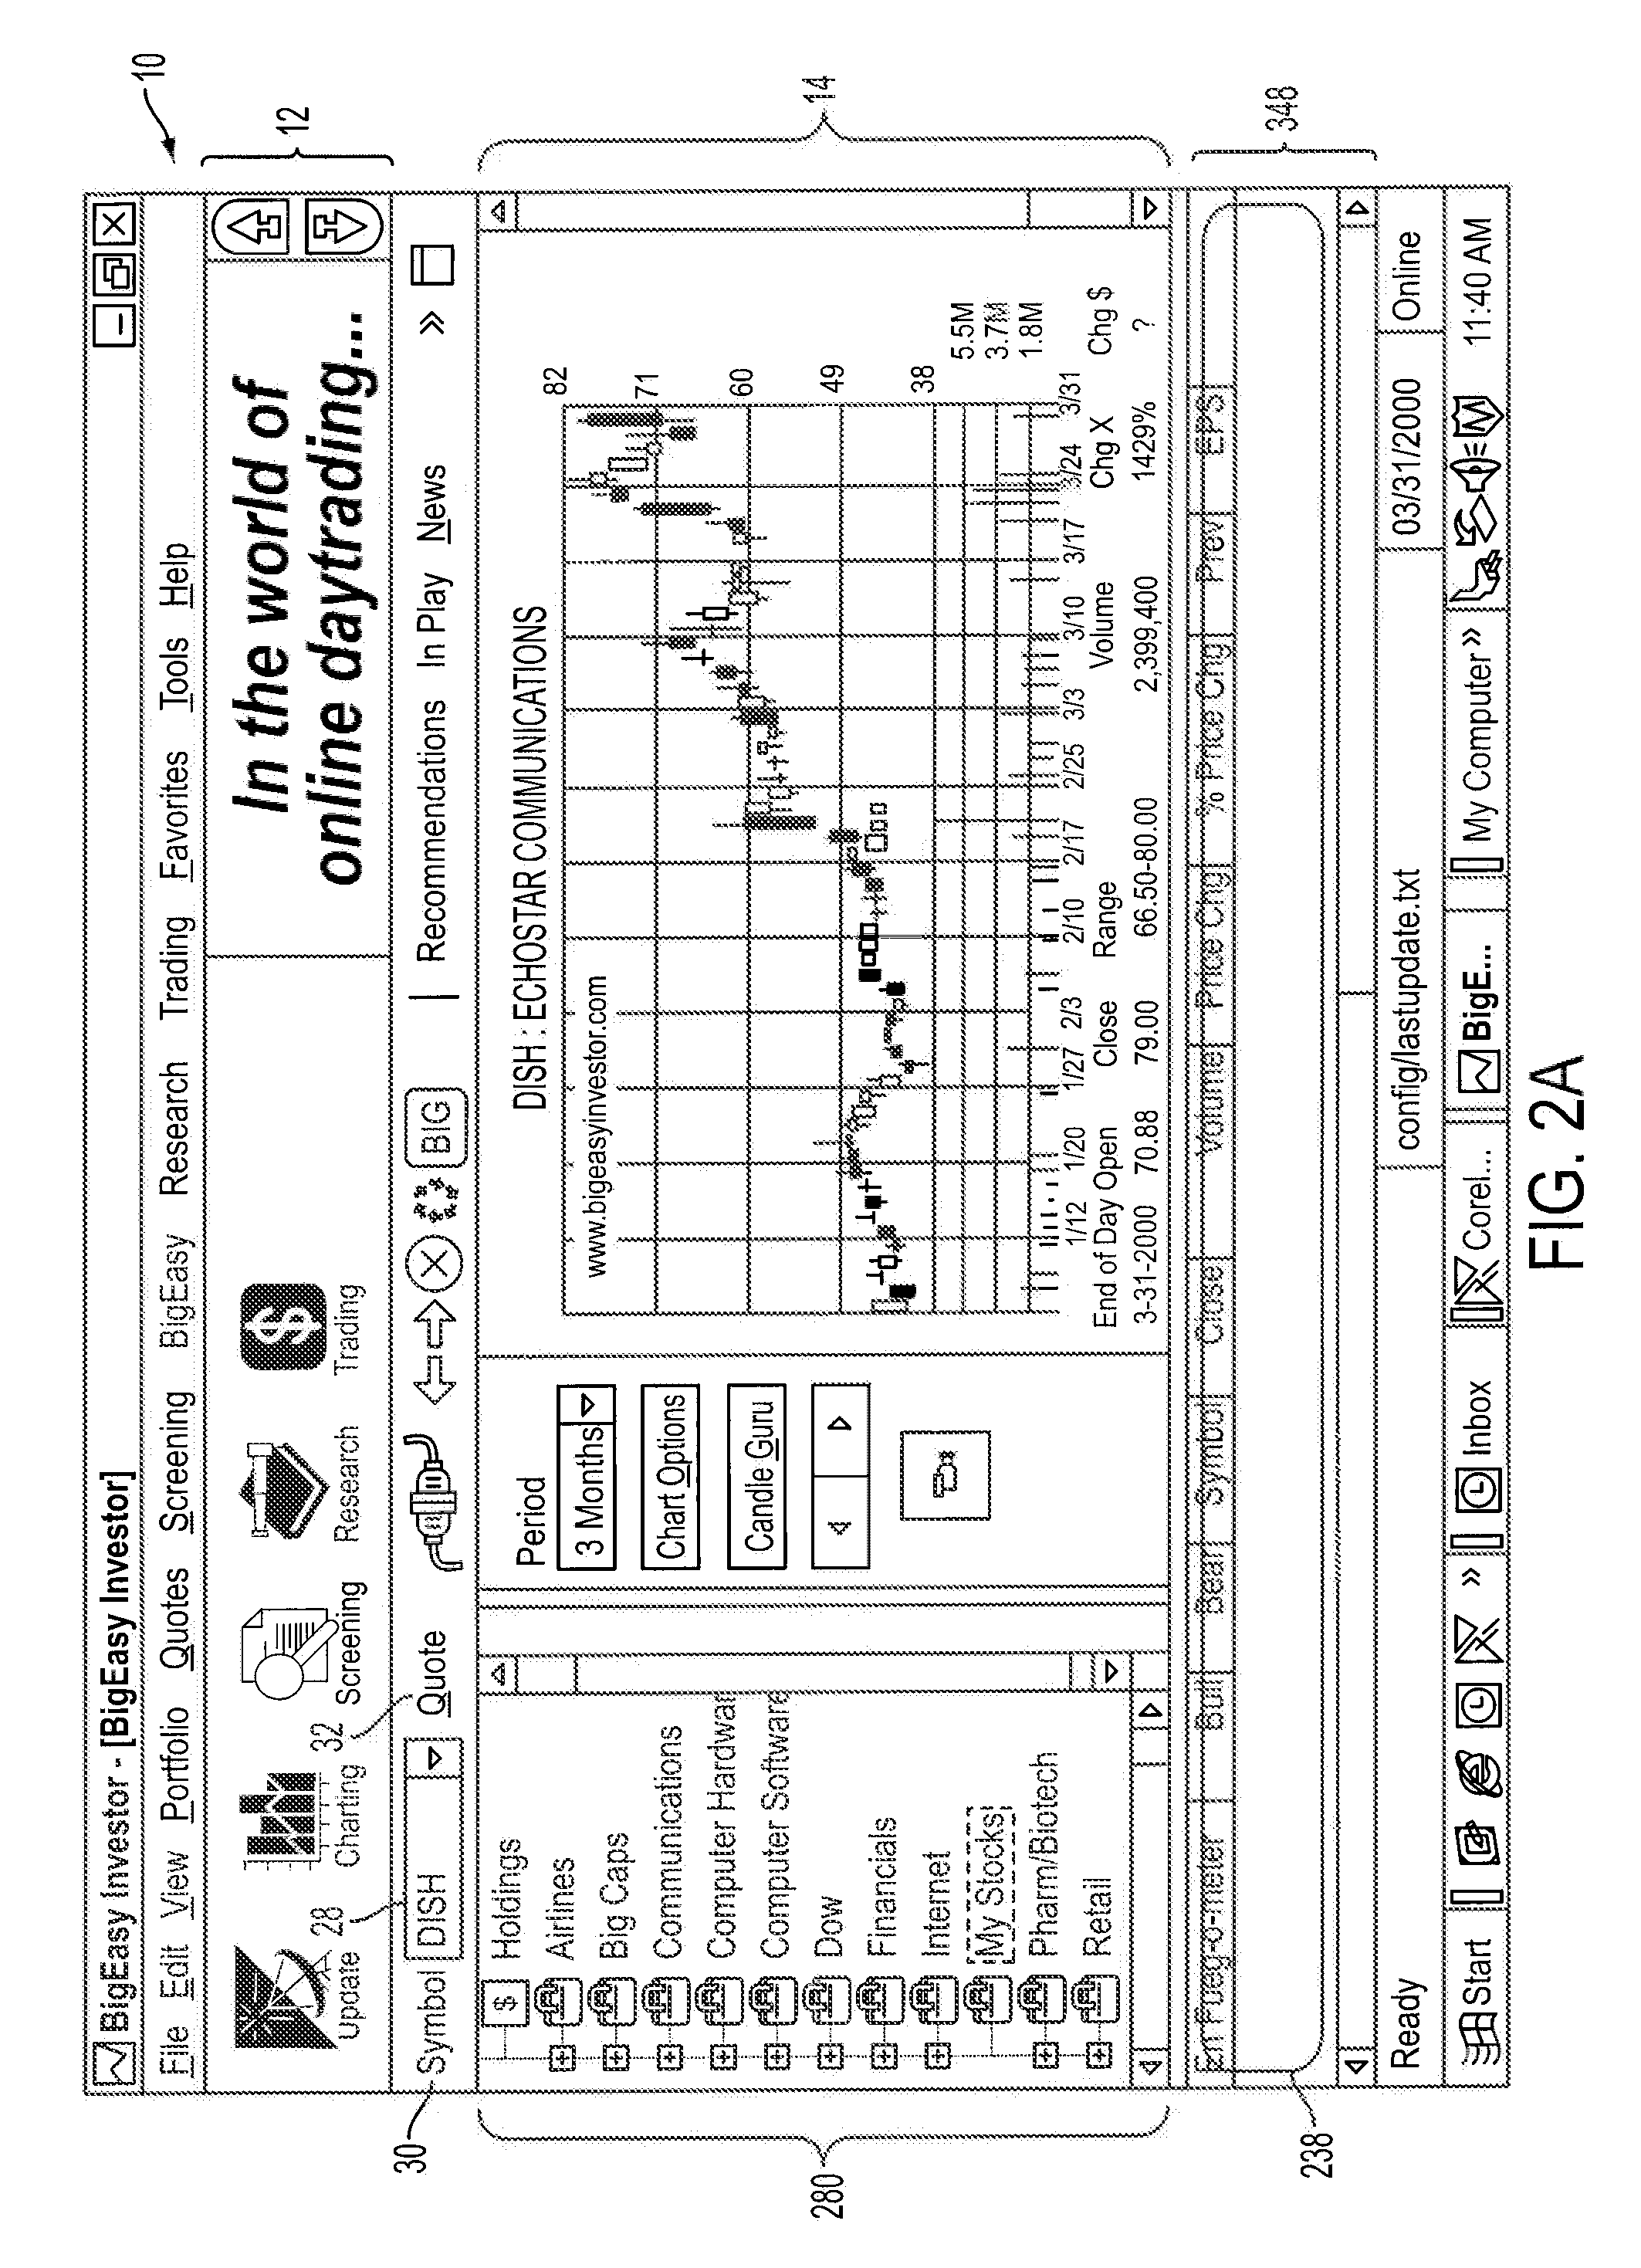 Method and system for analyzing and screening investment information